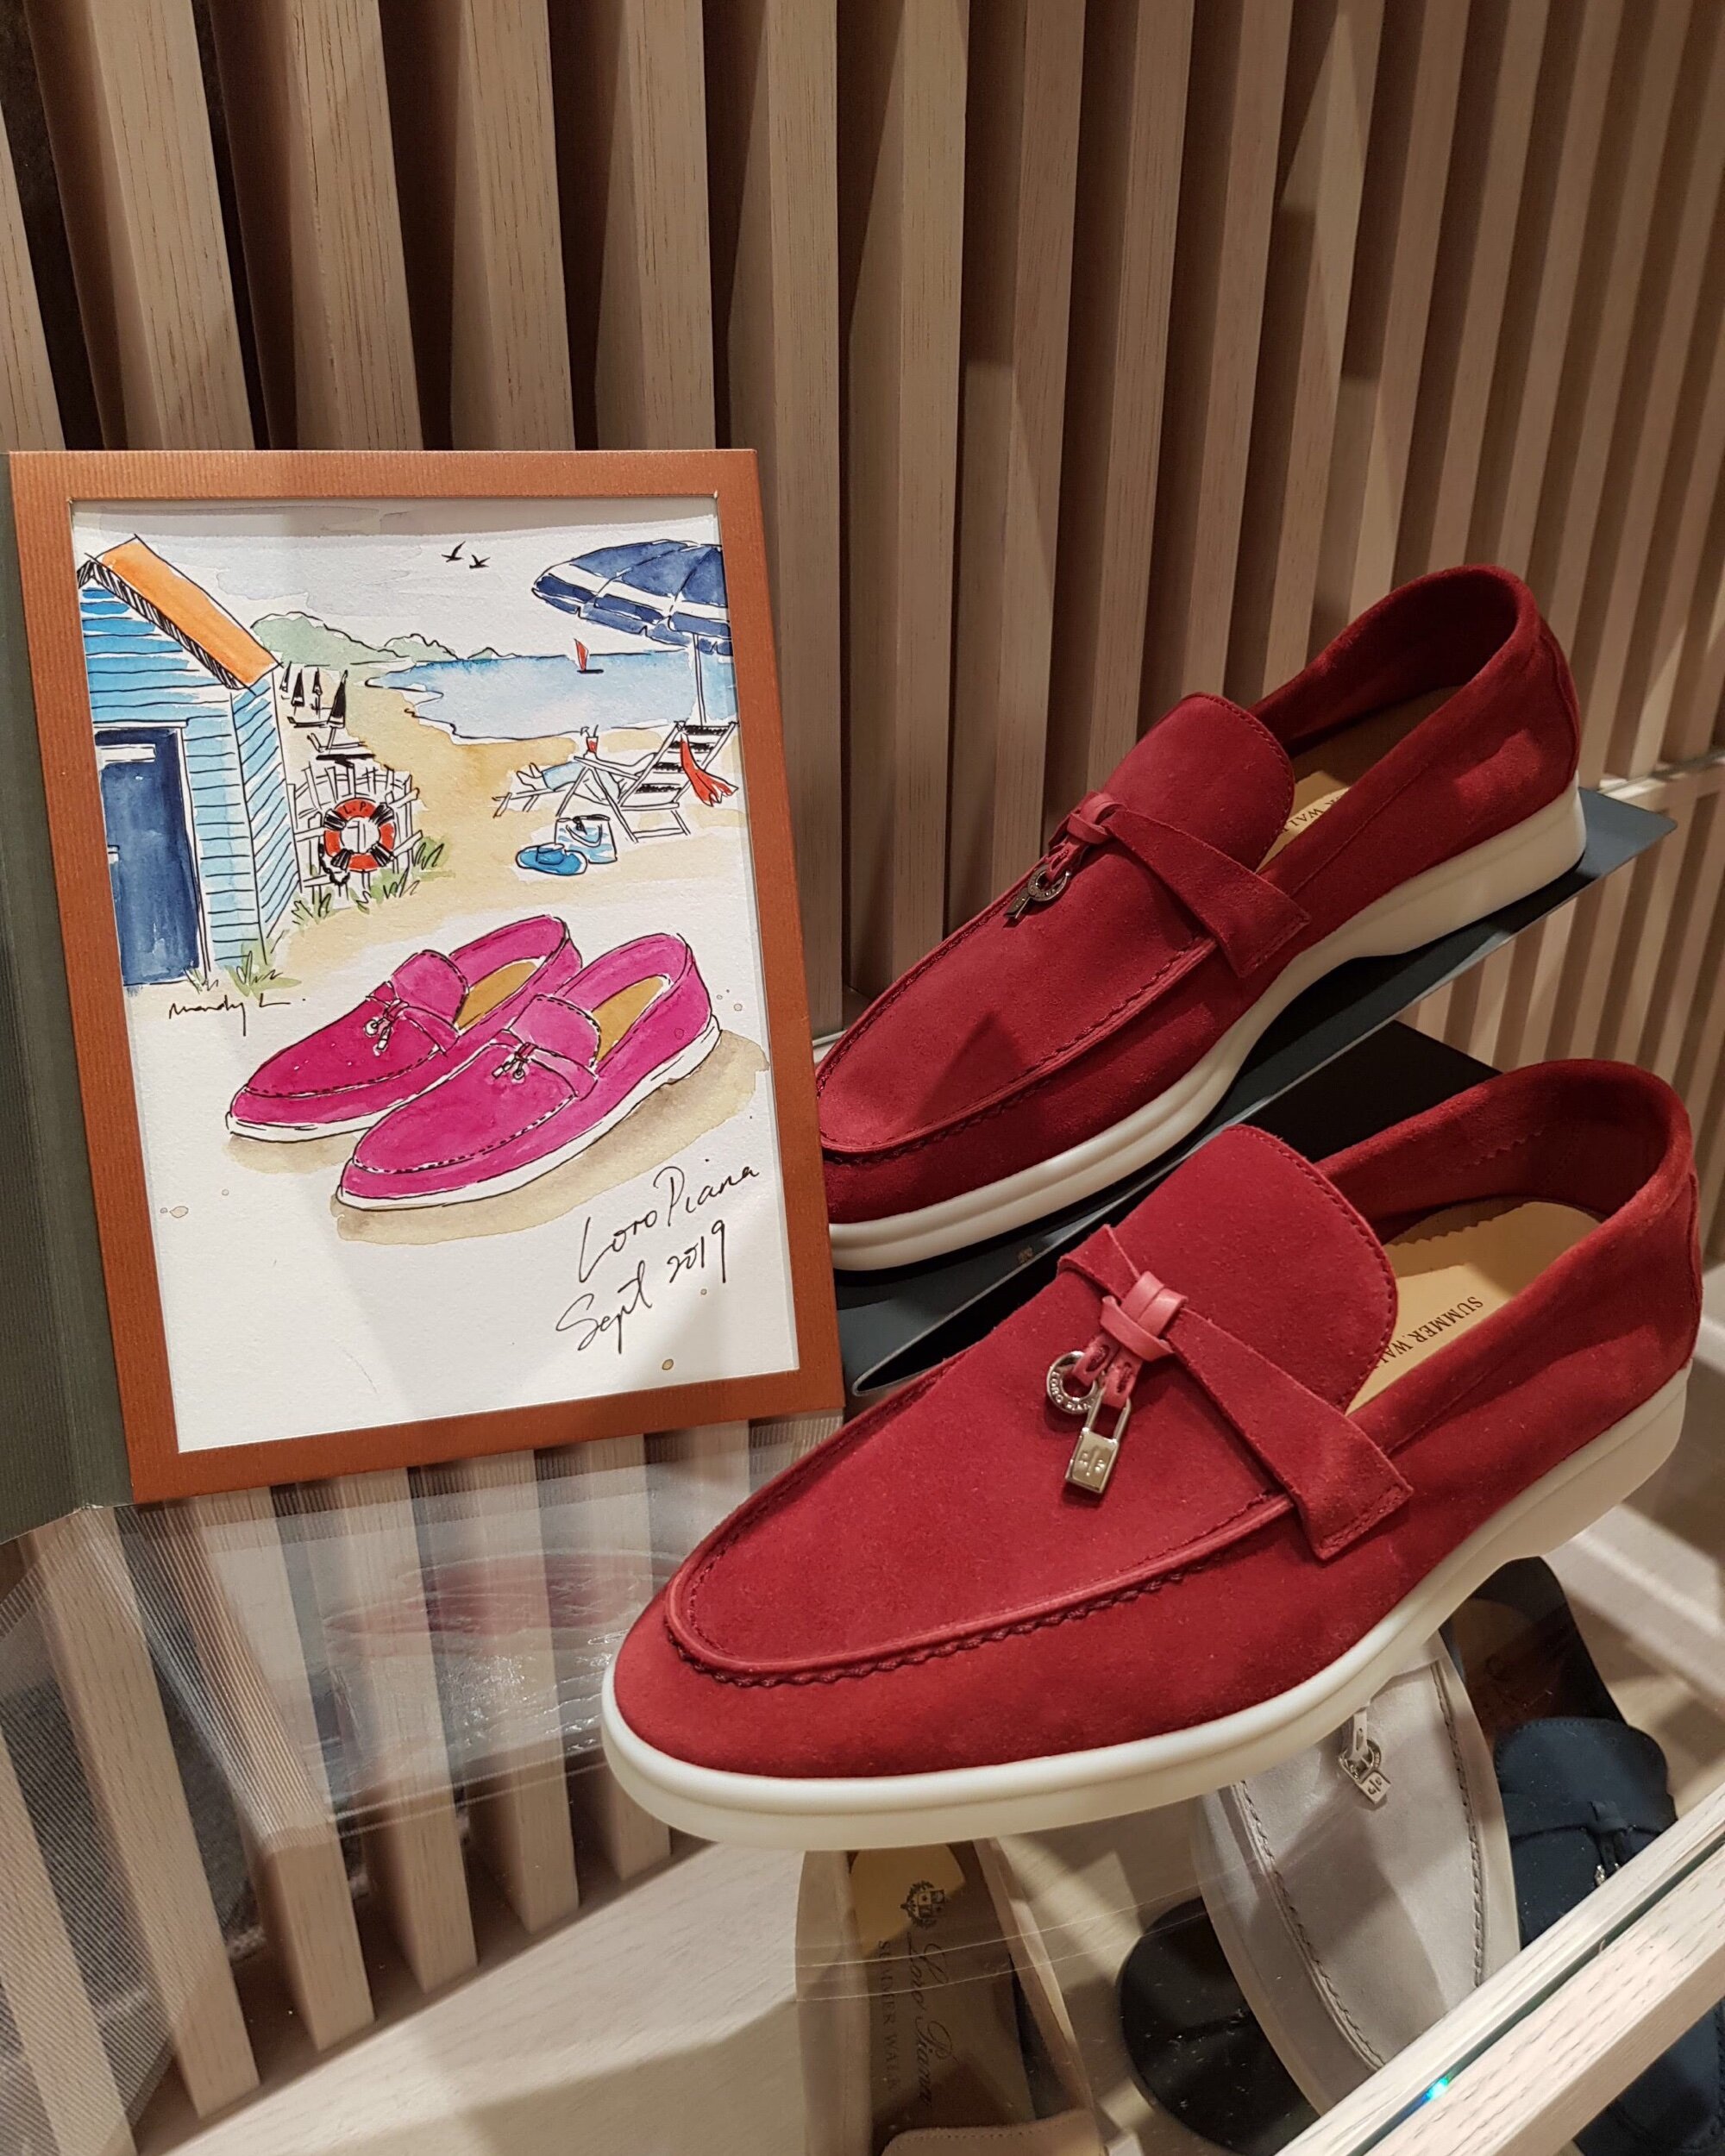 Live Illustration at Loro Piana Made to Order Shoe Launch Event